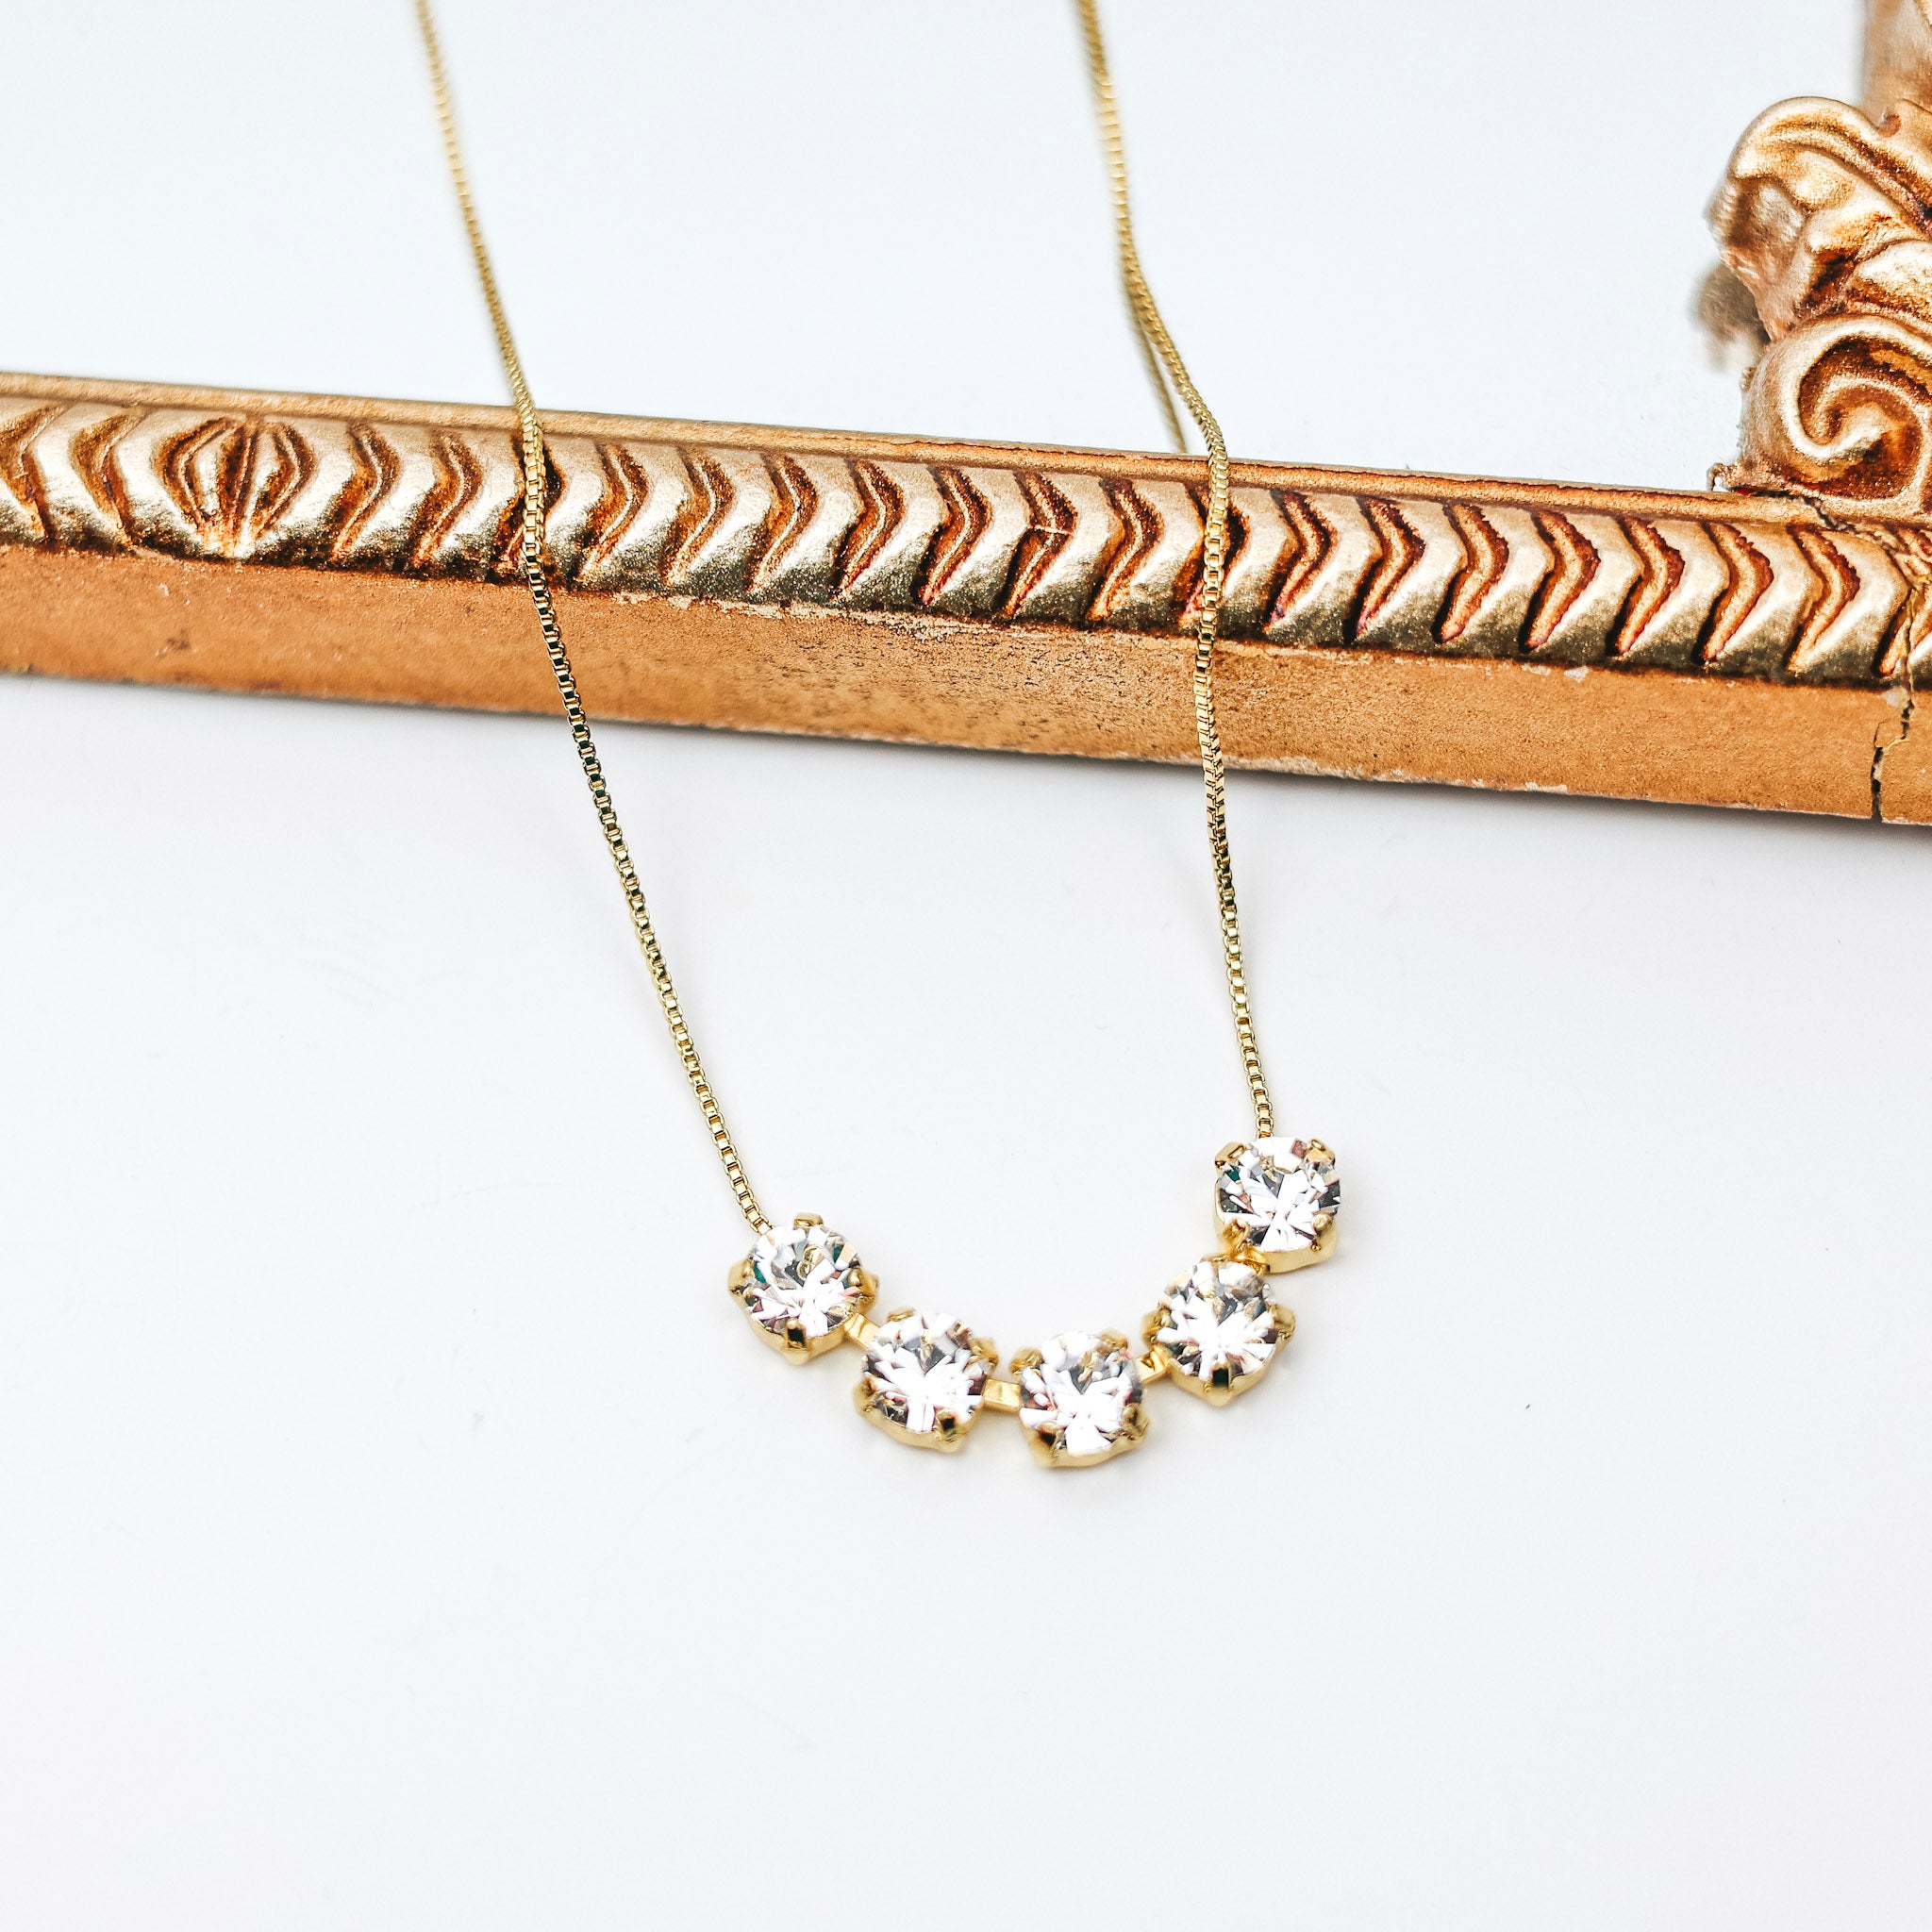 A gold chain necklace necklace with 4 clear crystals at the center. Pictured on a white background with a mirror.